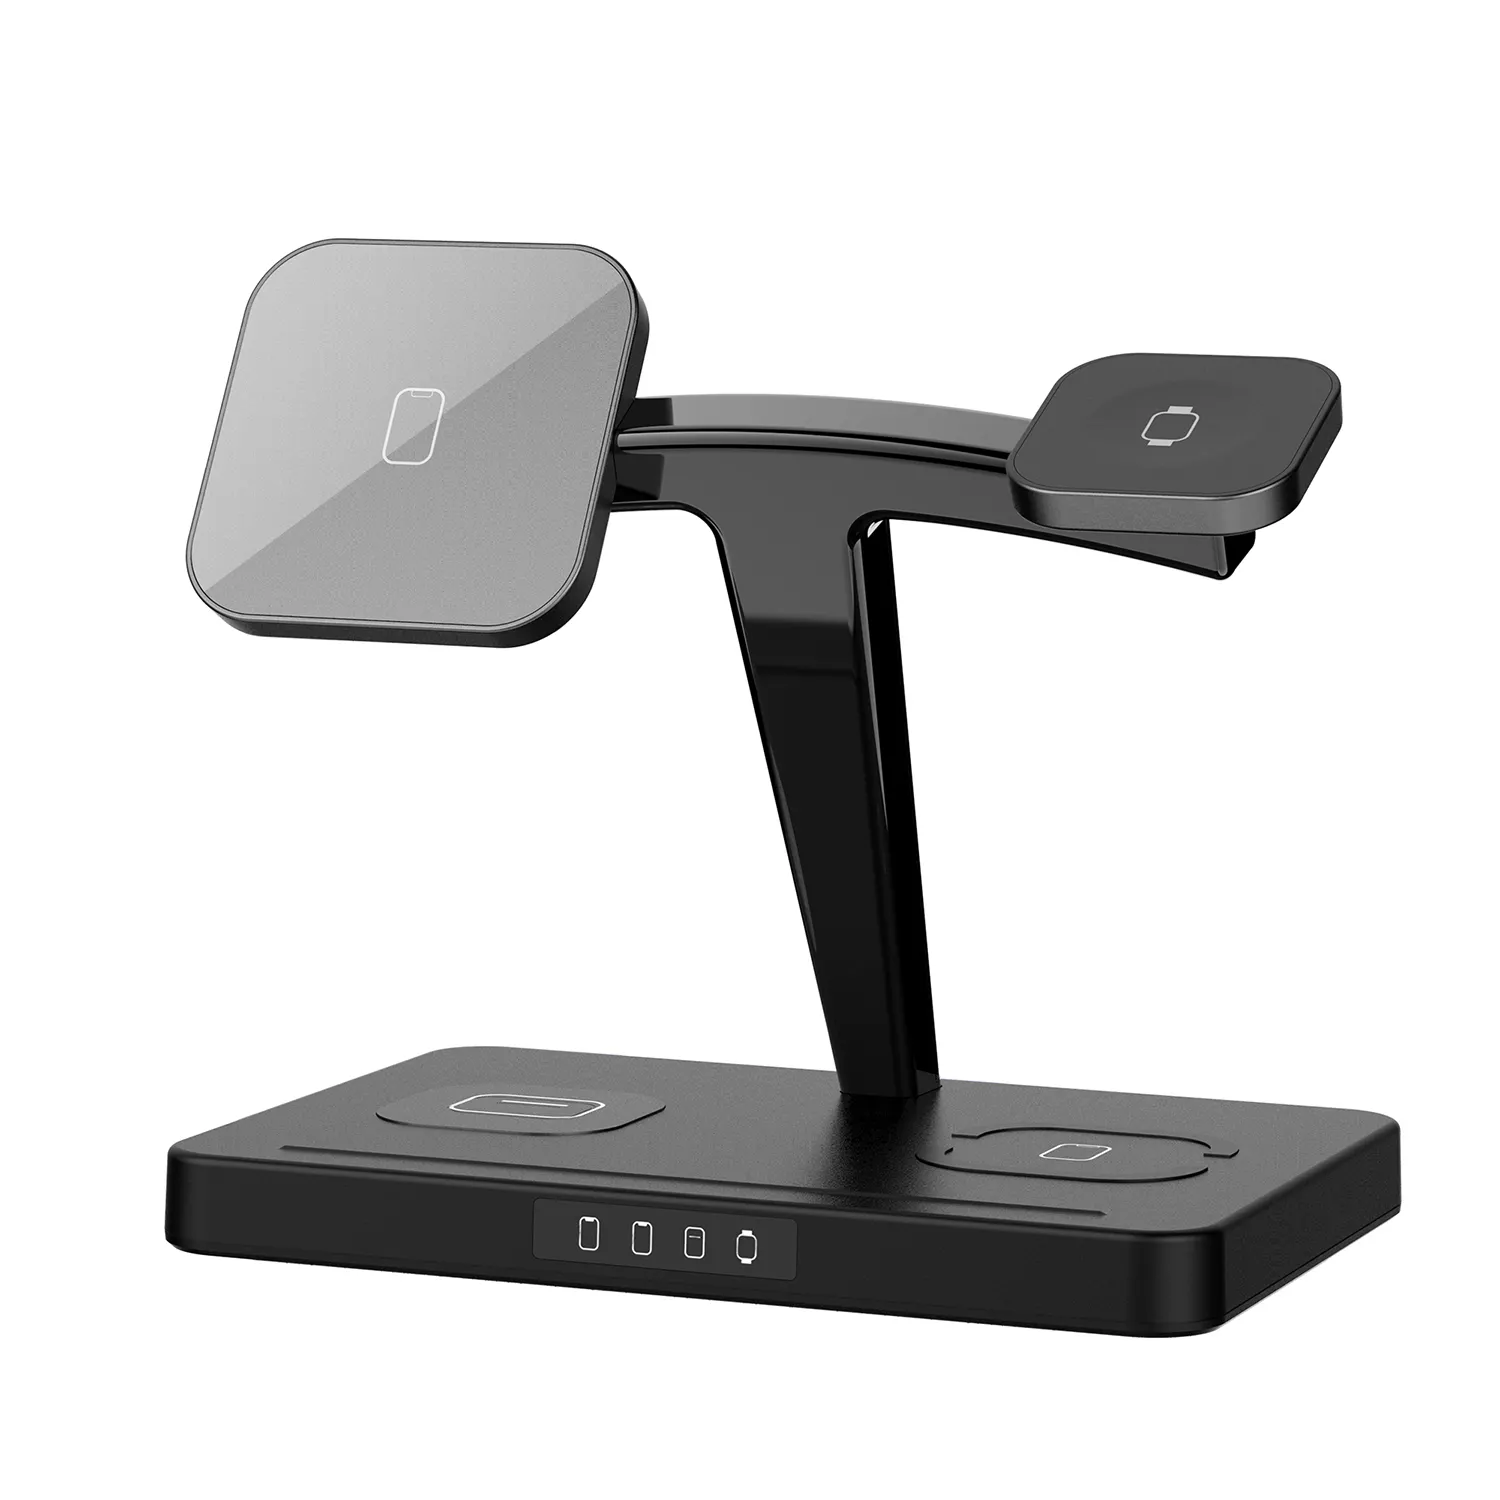 New Version Wireless Charger Stand 4 in 1 Wireless Charger Device for Mobile Phone